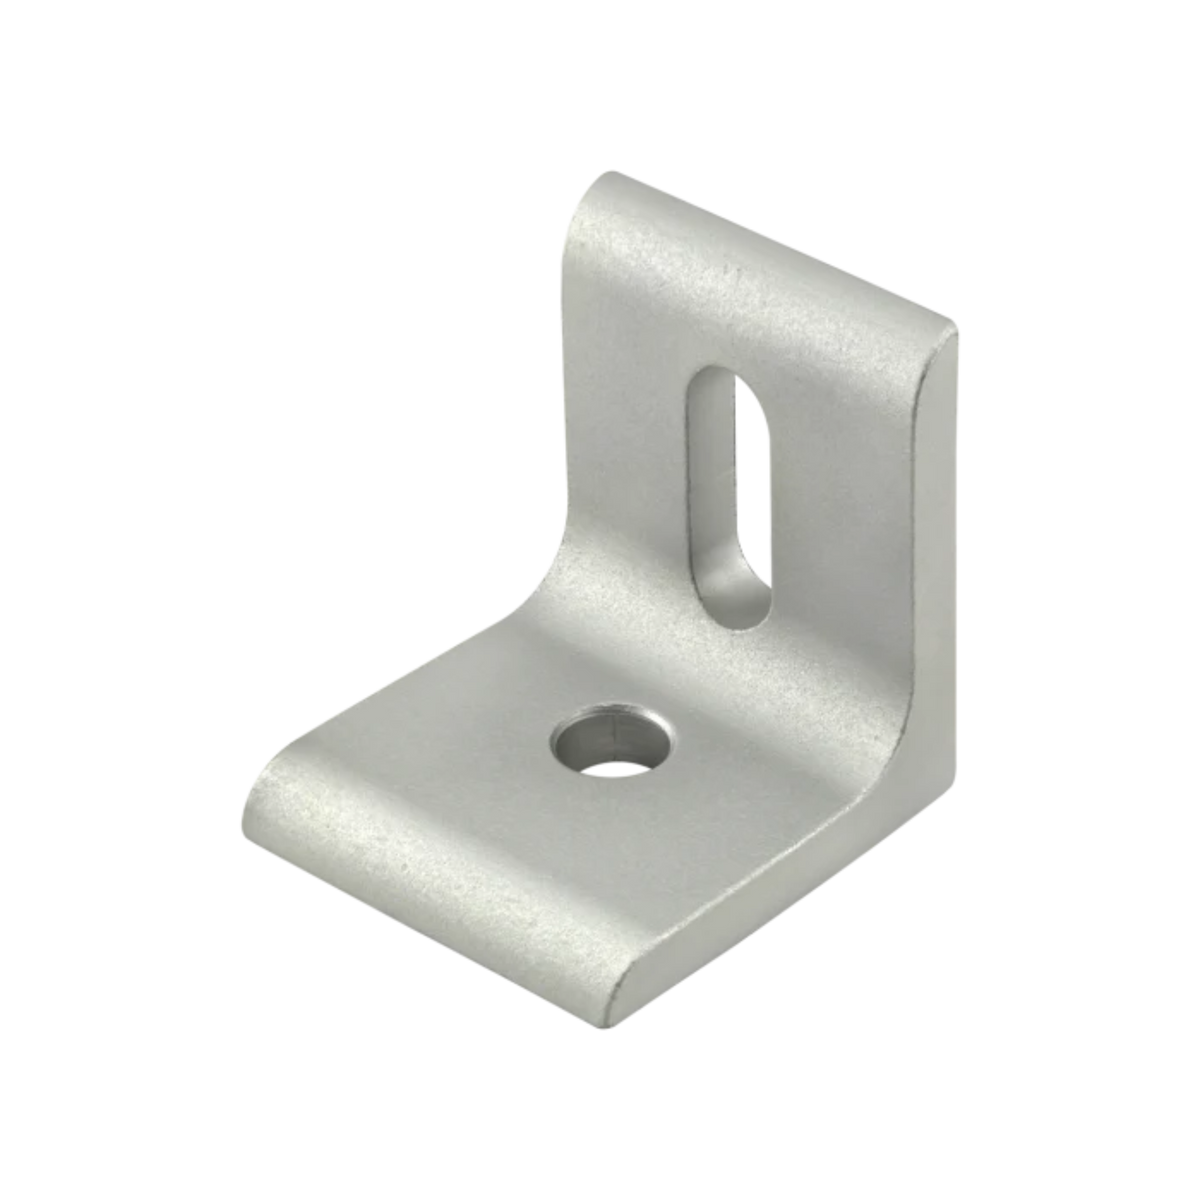 grey, metal corner bracket with the corner on the right side that has a round hole in the bottom piece and an oval hole in the side piece